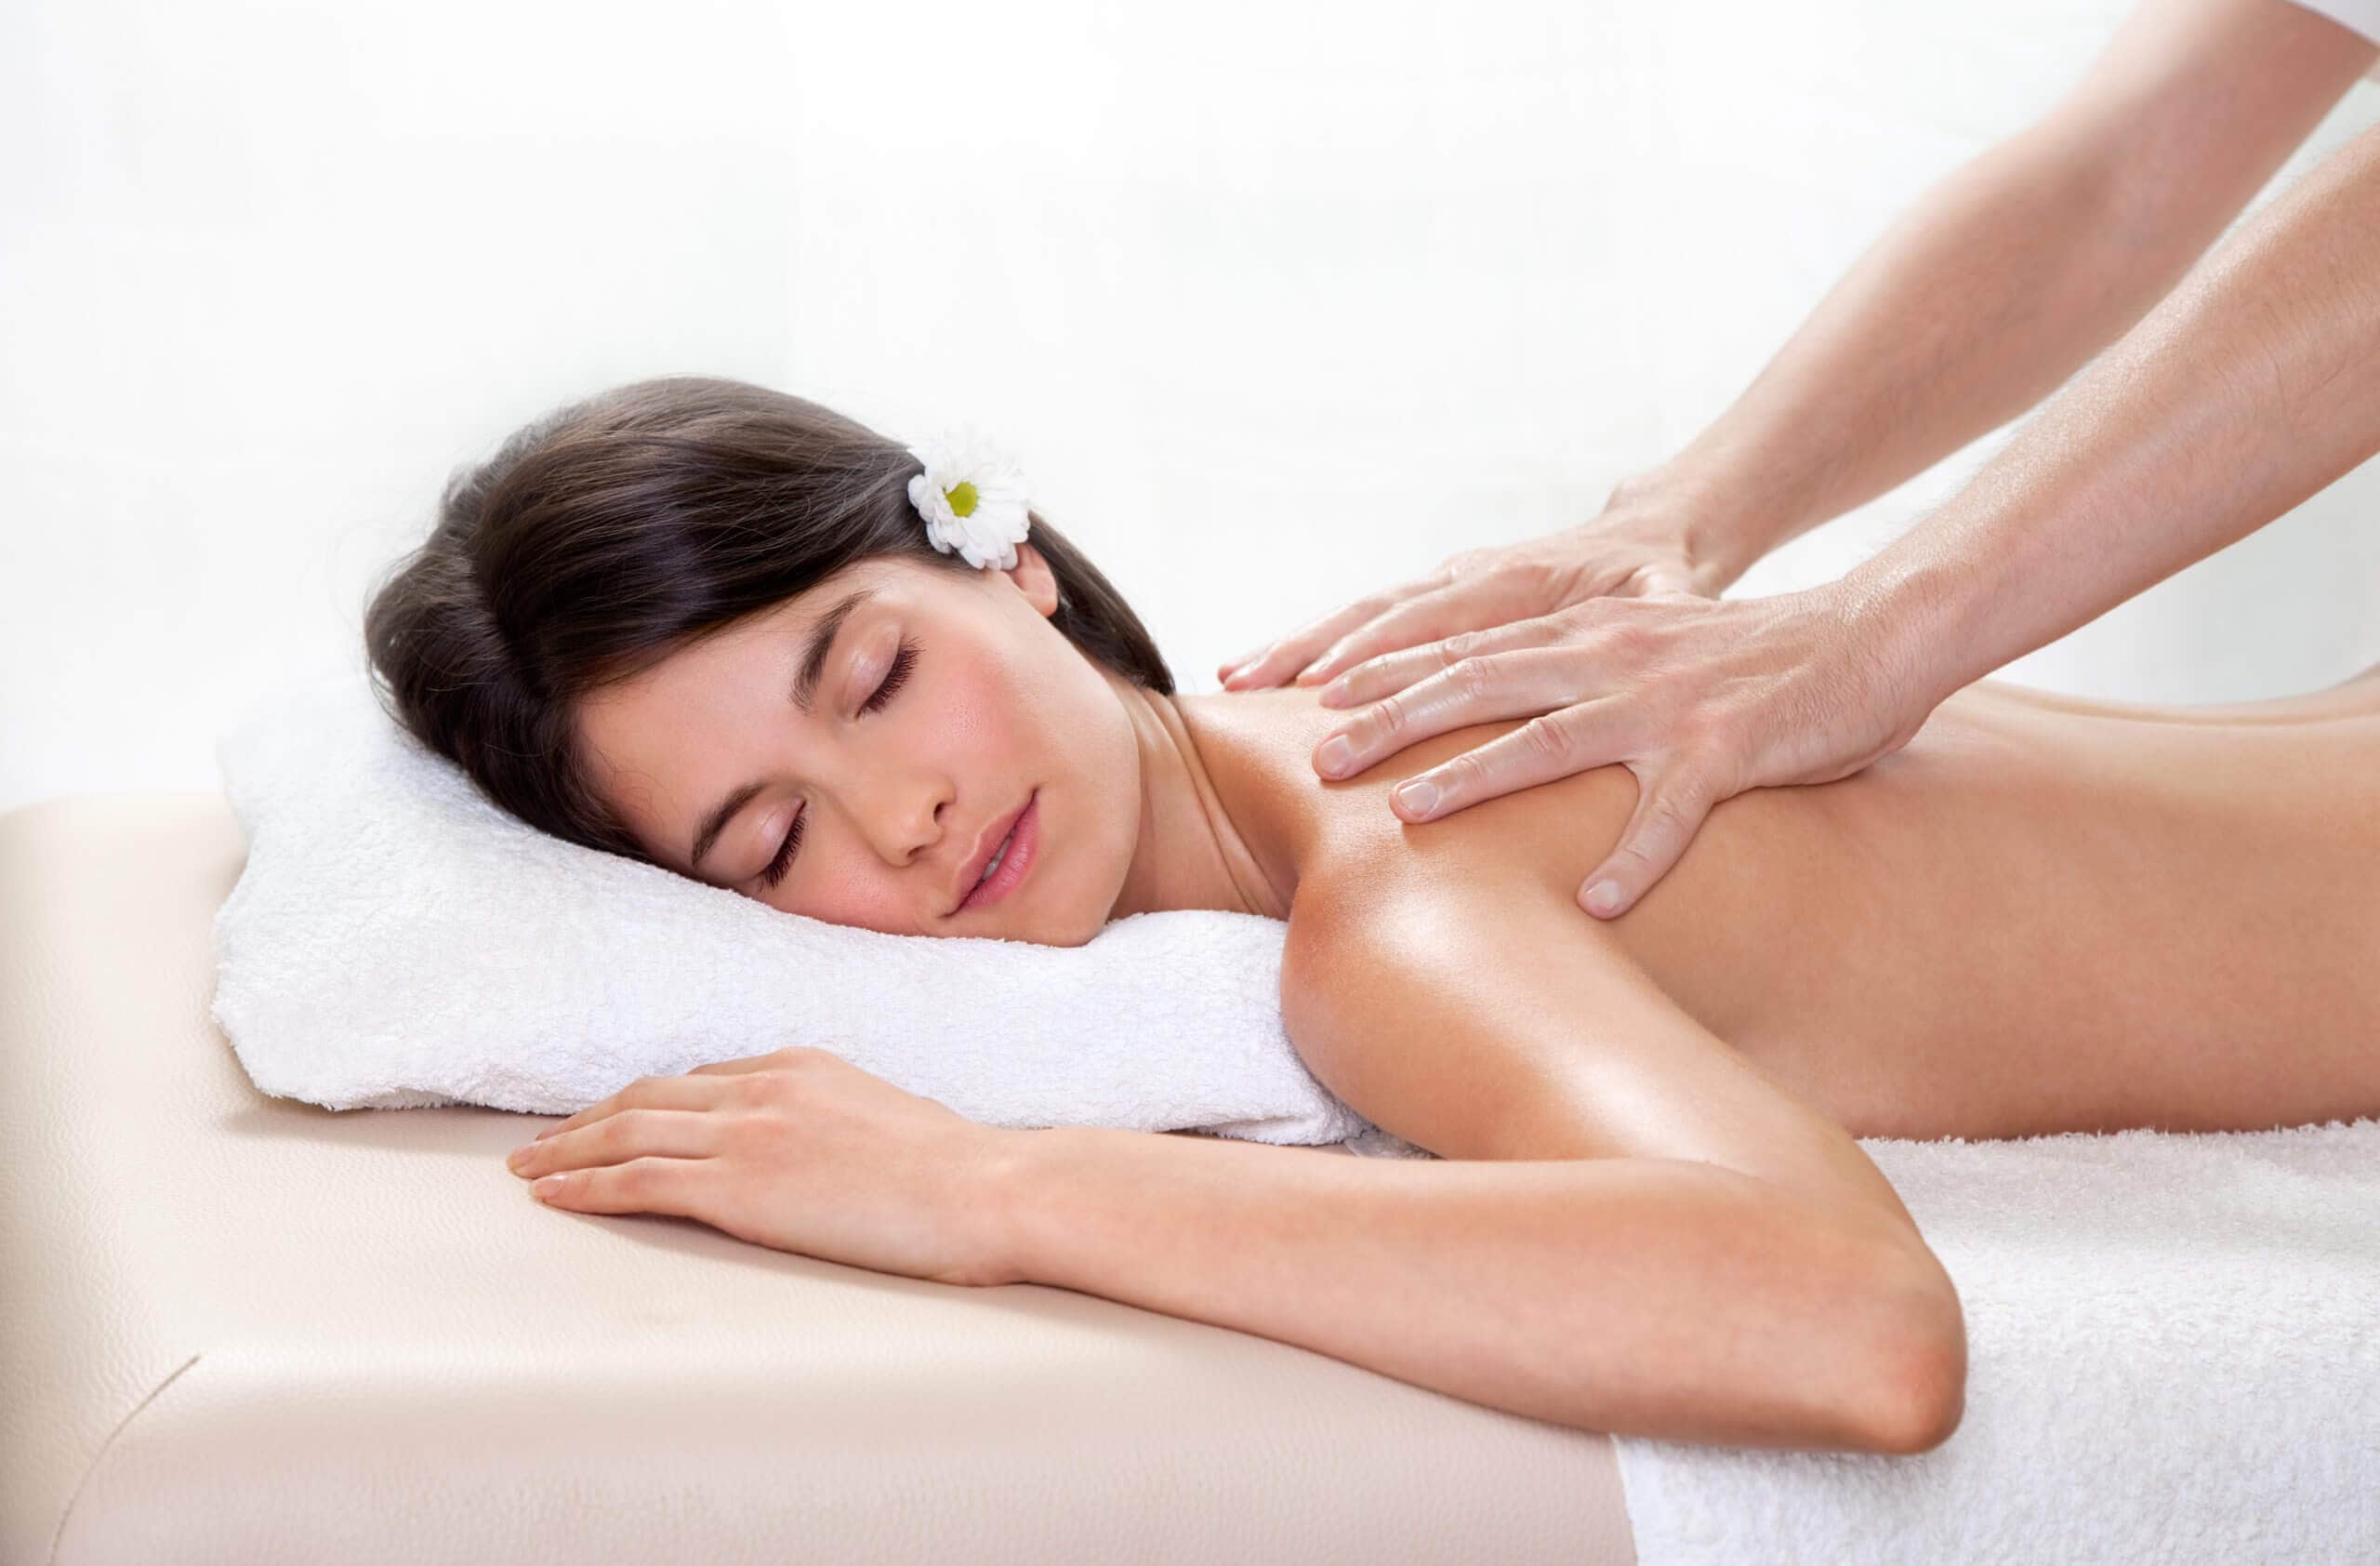 Indulge and Rejuvenate Exploring the Blissful World of Spa Services